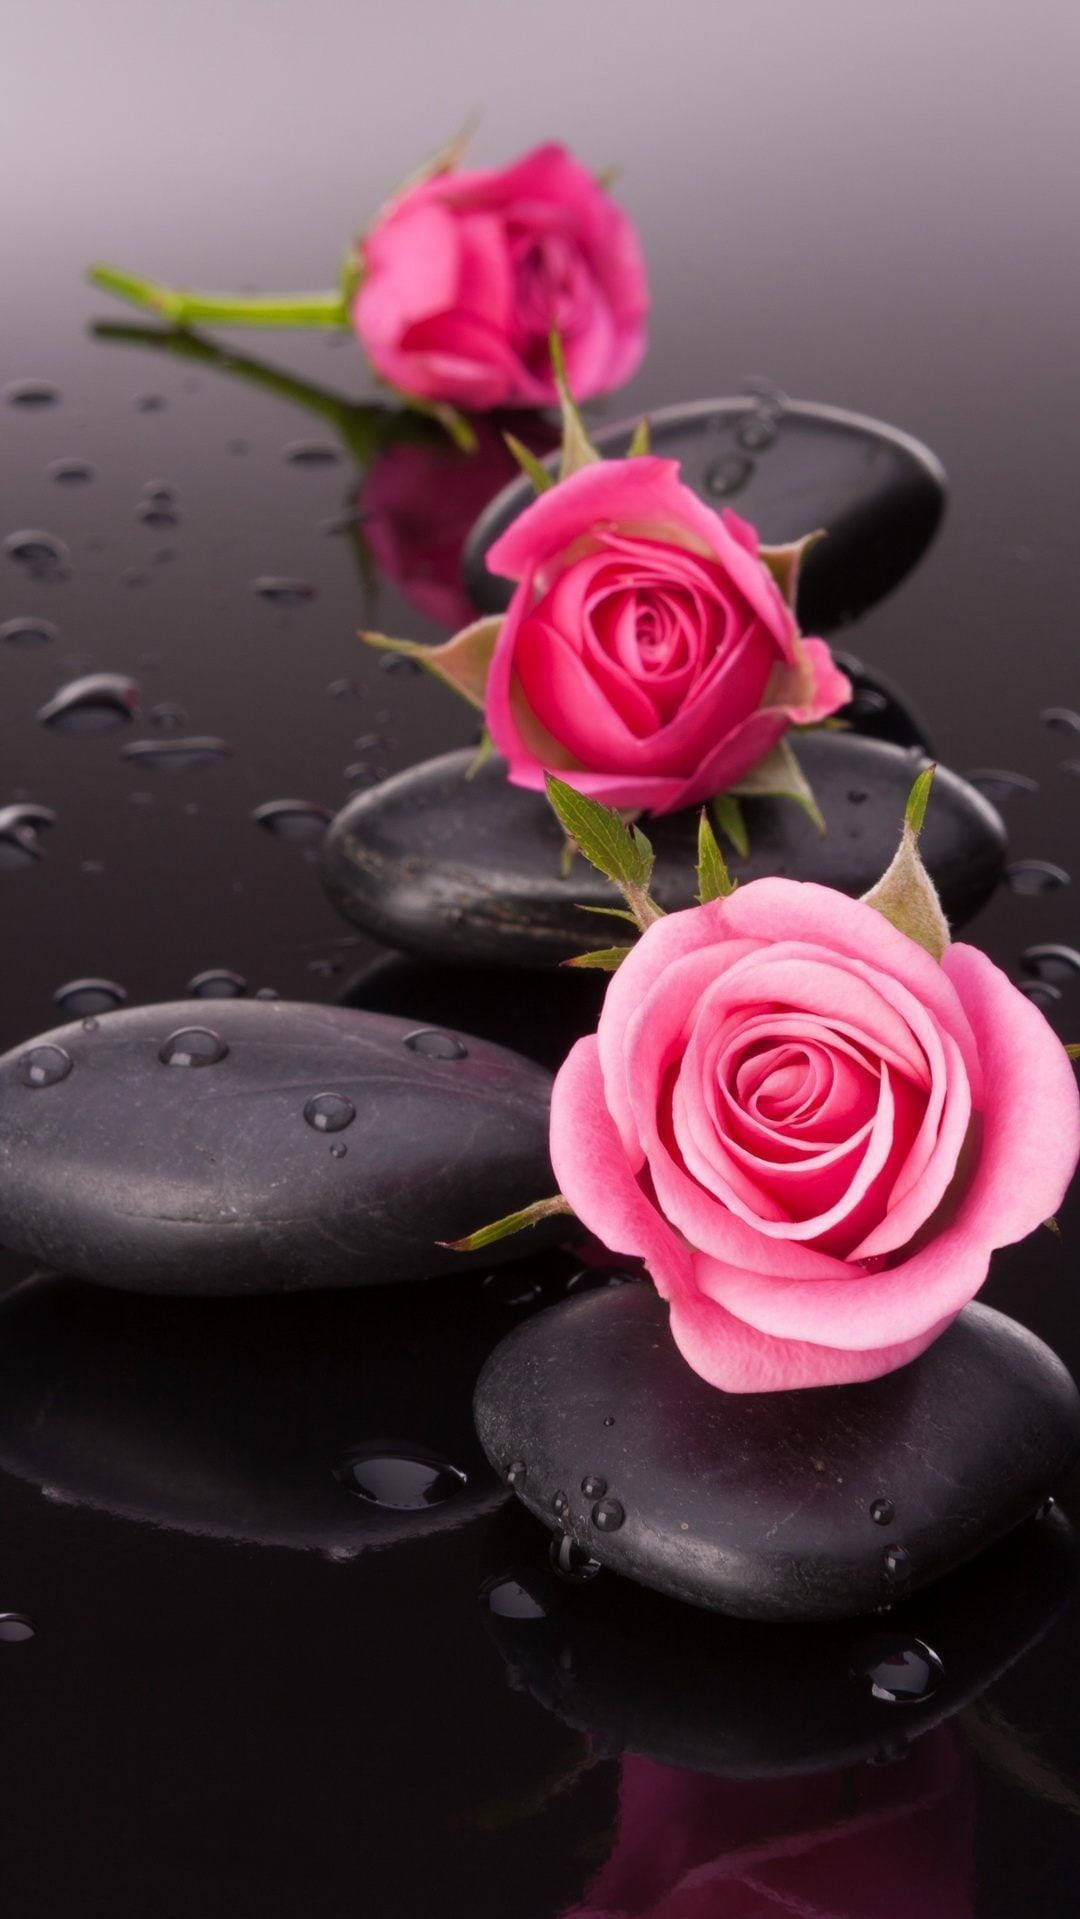 Spa Stone And Pink Roses Flower Mobile Wallpaper